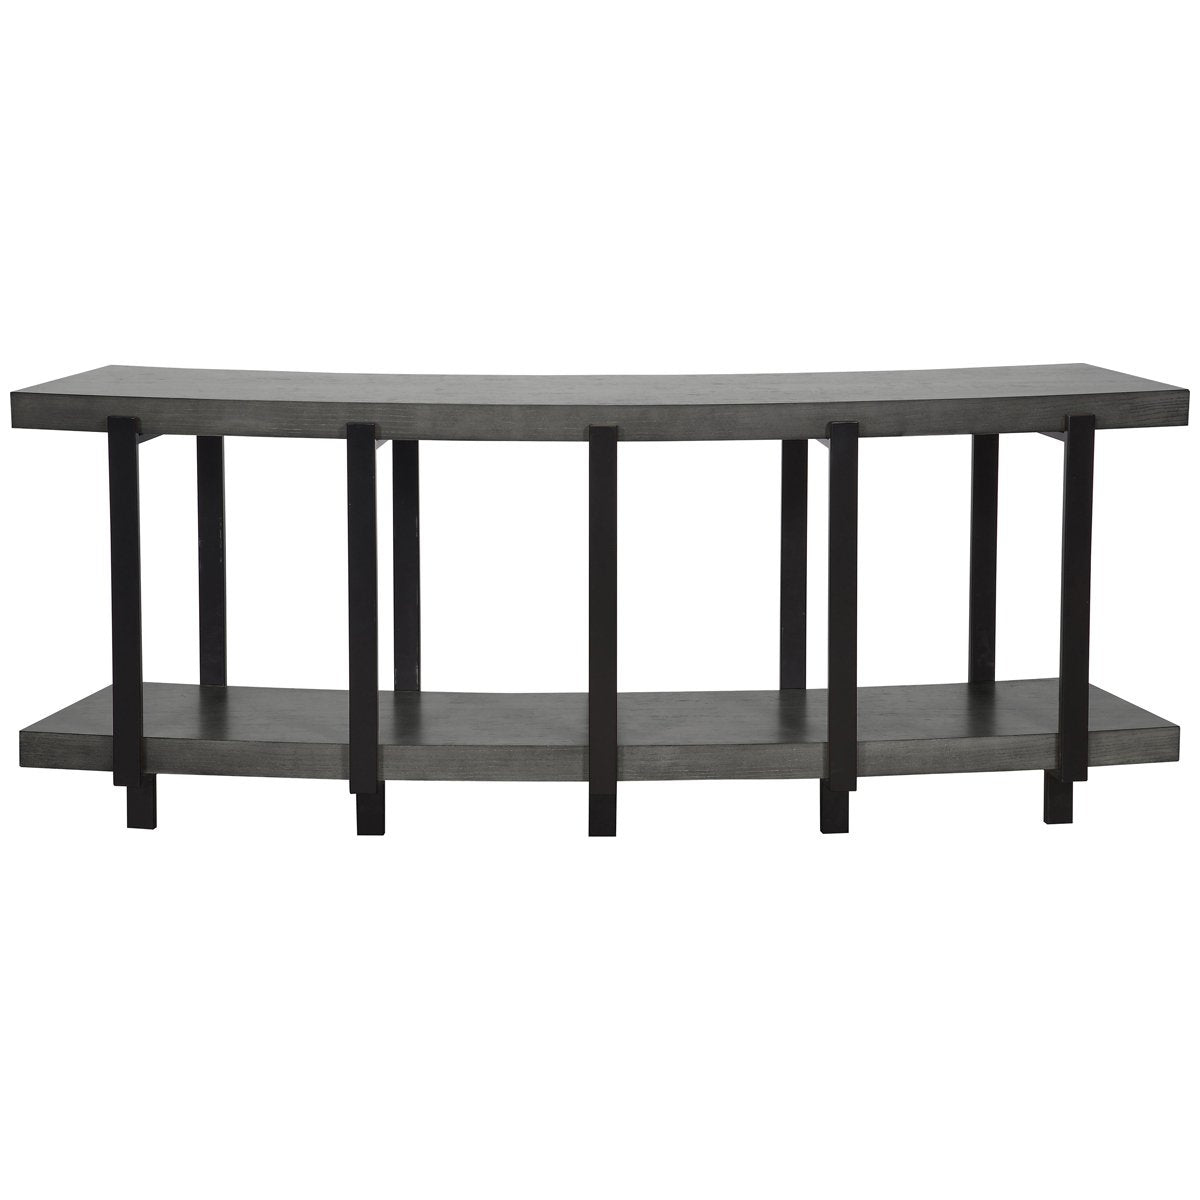 Vanguard Furniture Kentwood Curved Console Table